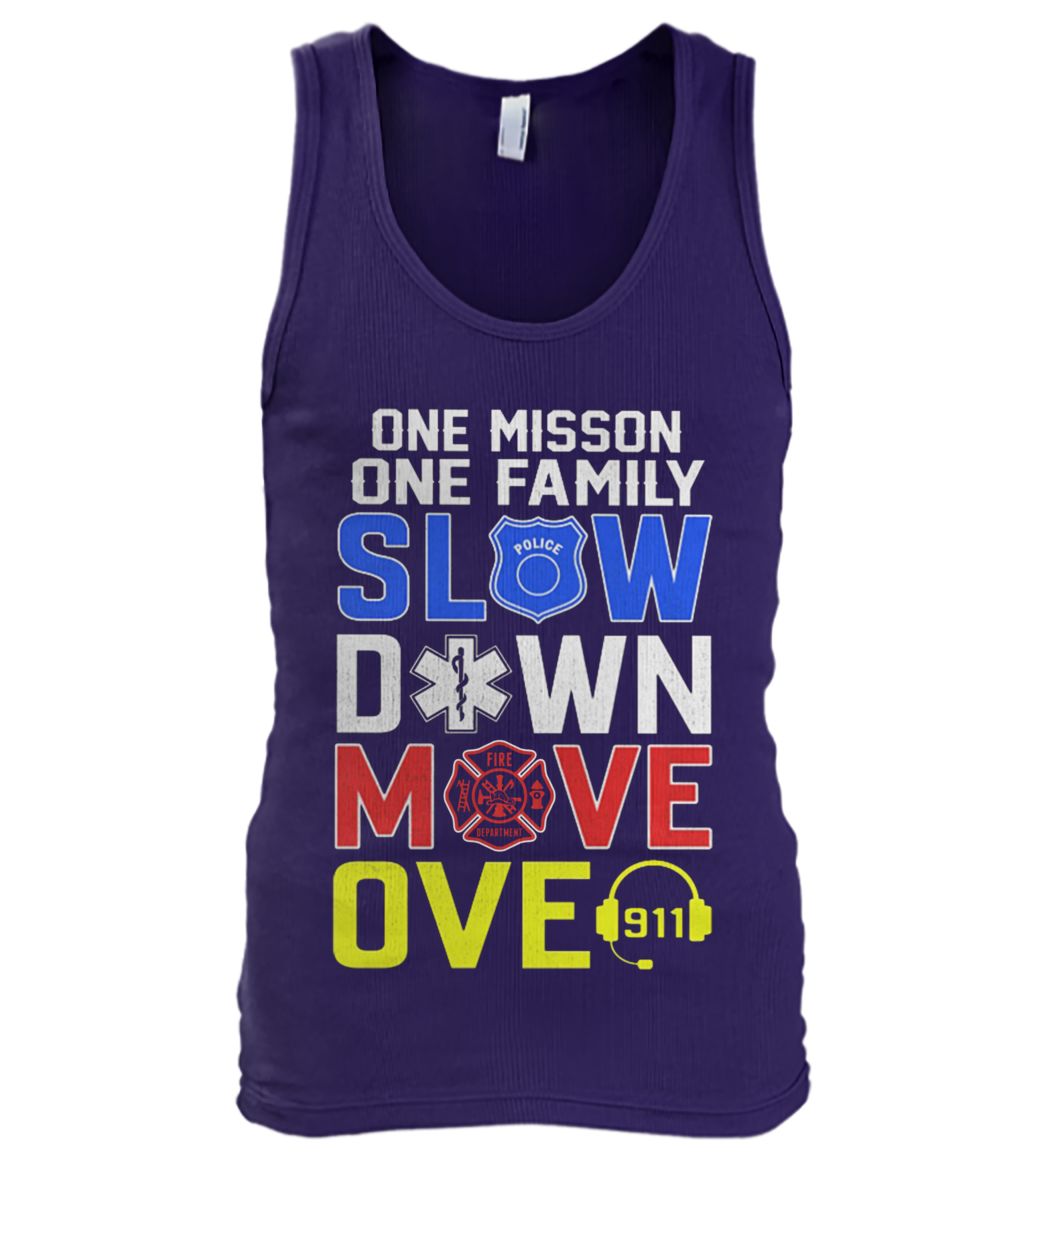 One misson one family slow down move over 911 men's tank top